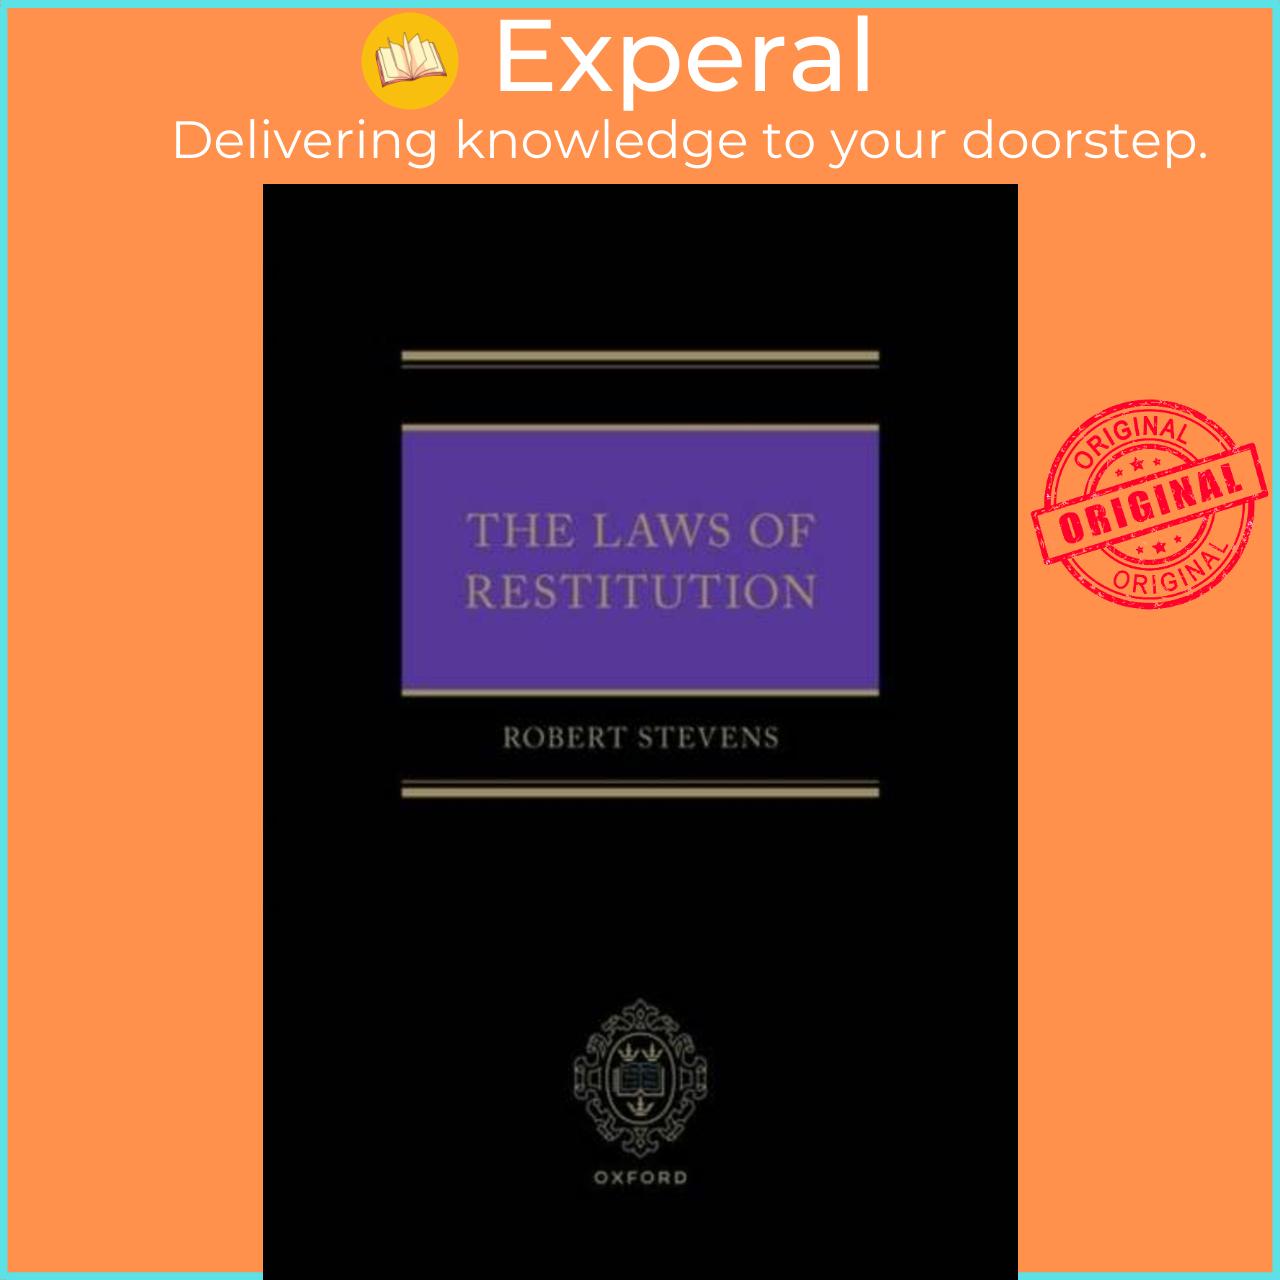 Sách - The Laws of Restitution by Prof Robert Stevens (UK edition, hardcover)